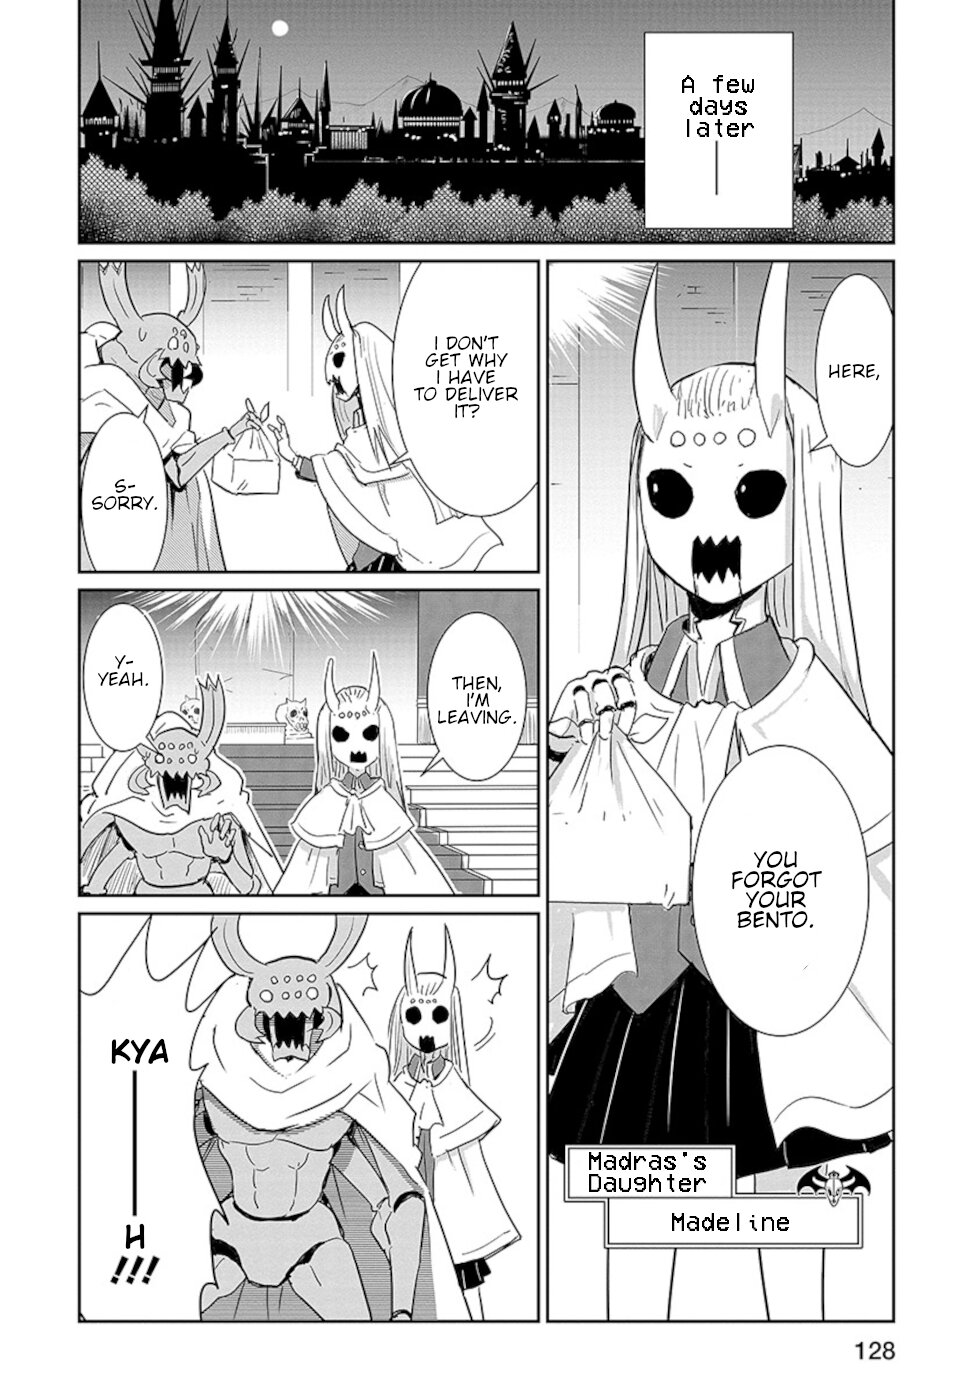 Don't Cry Maou chan Vol. 2 Ch. 15 How To Be A Great Demon King